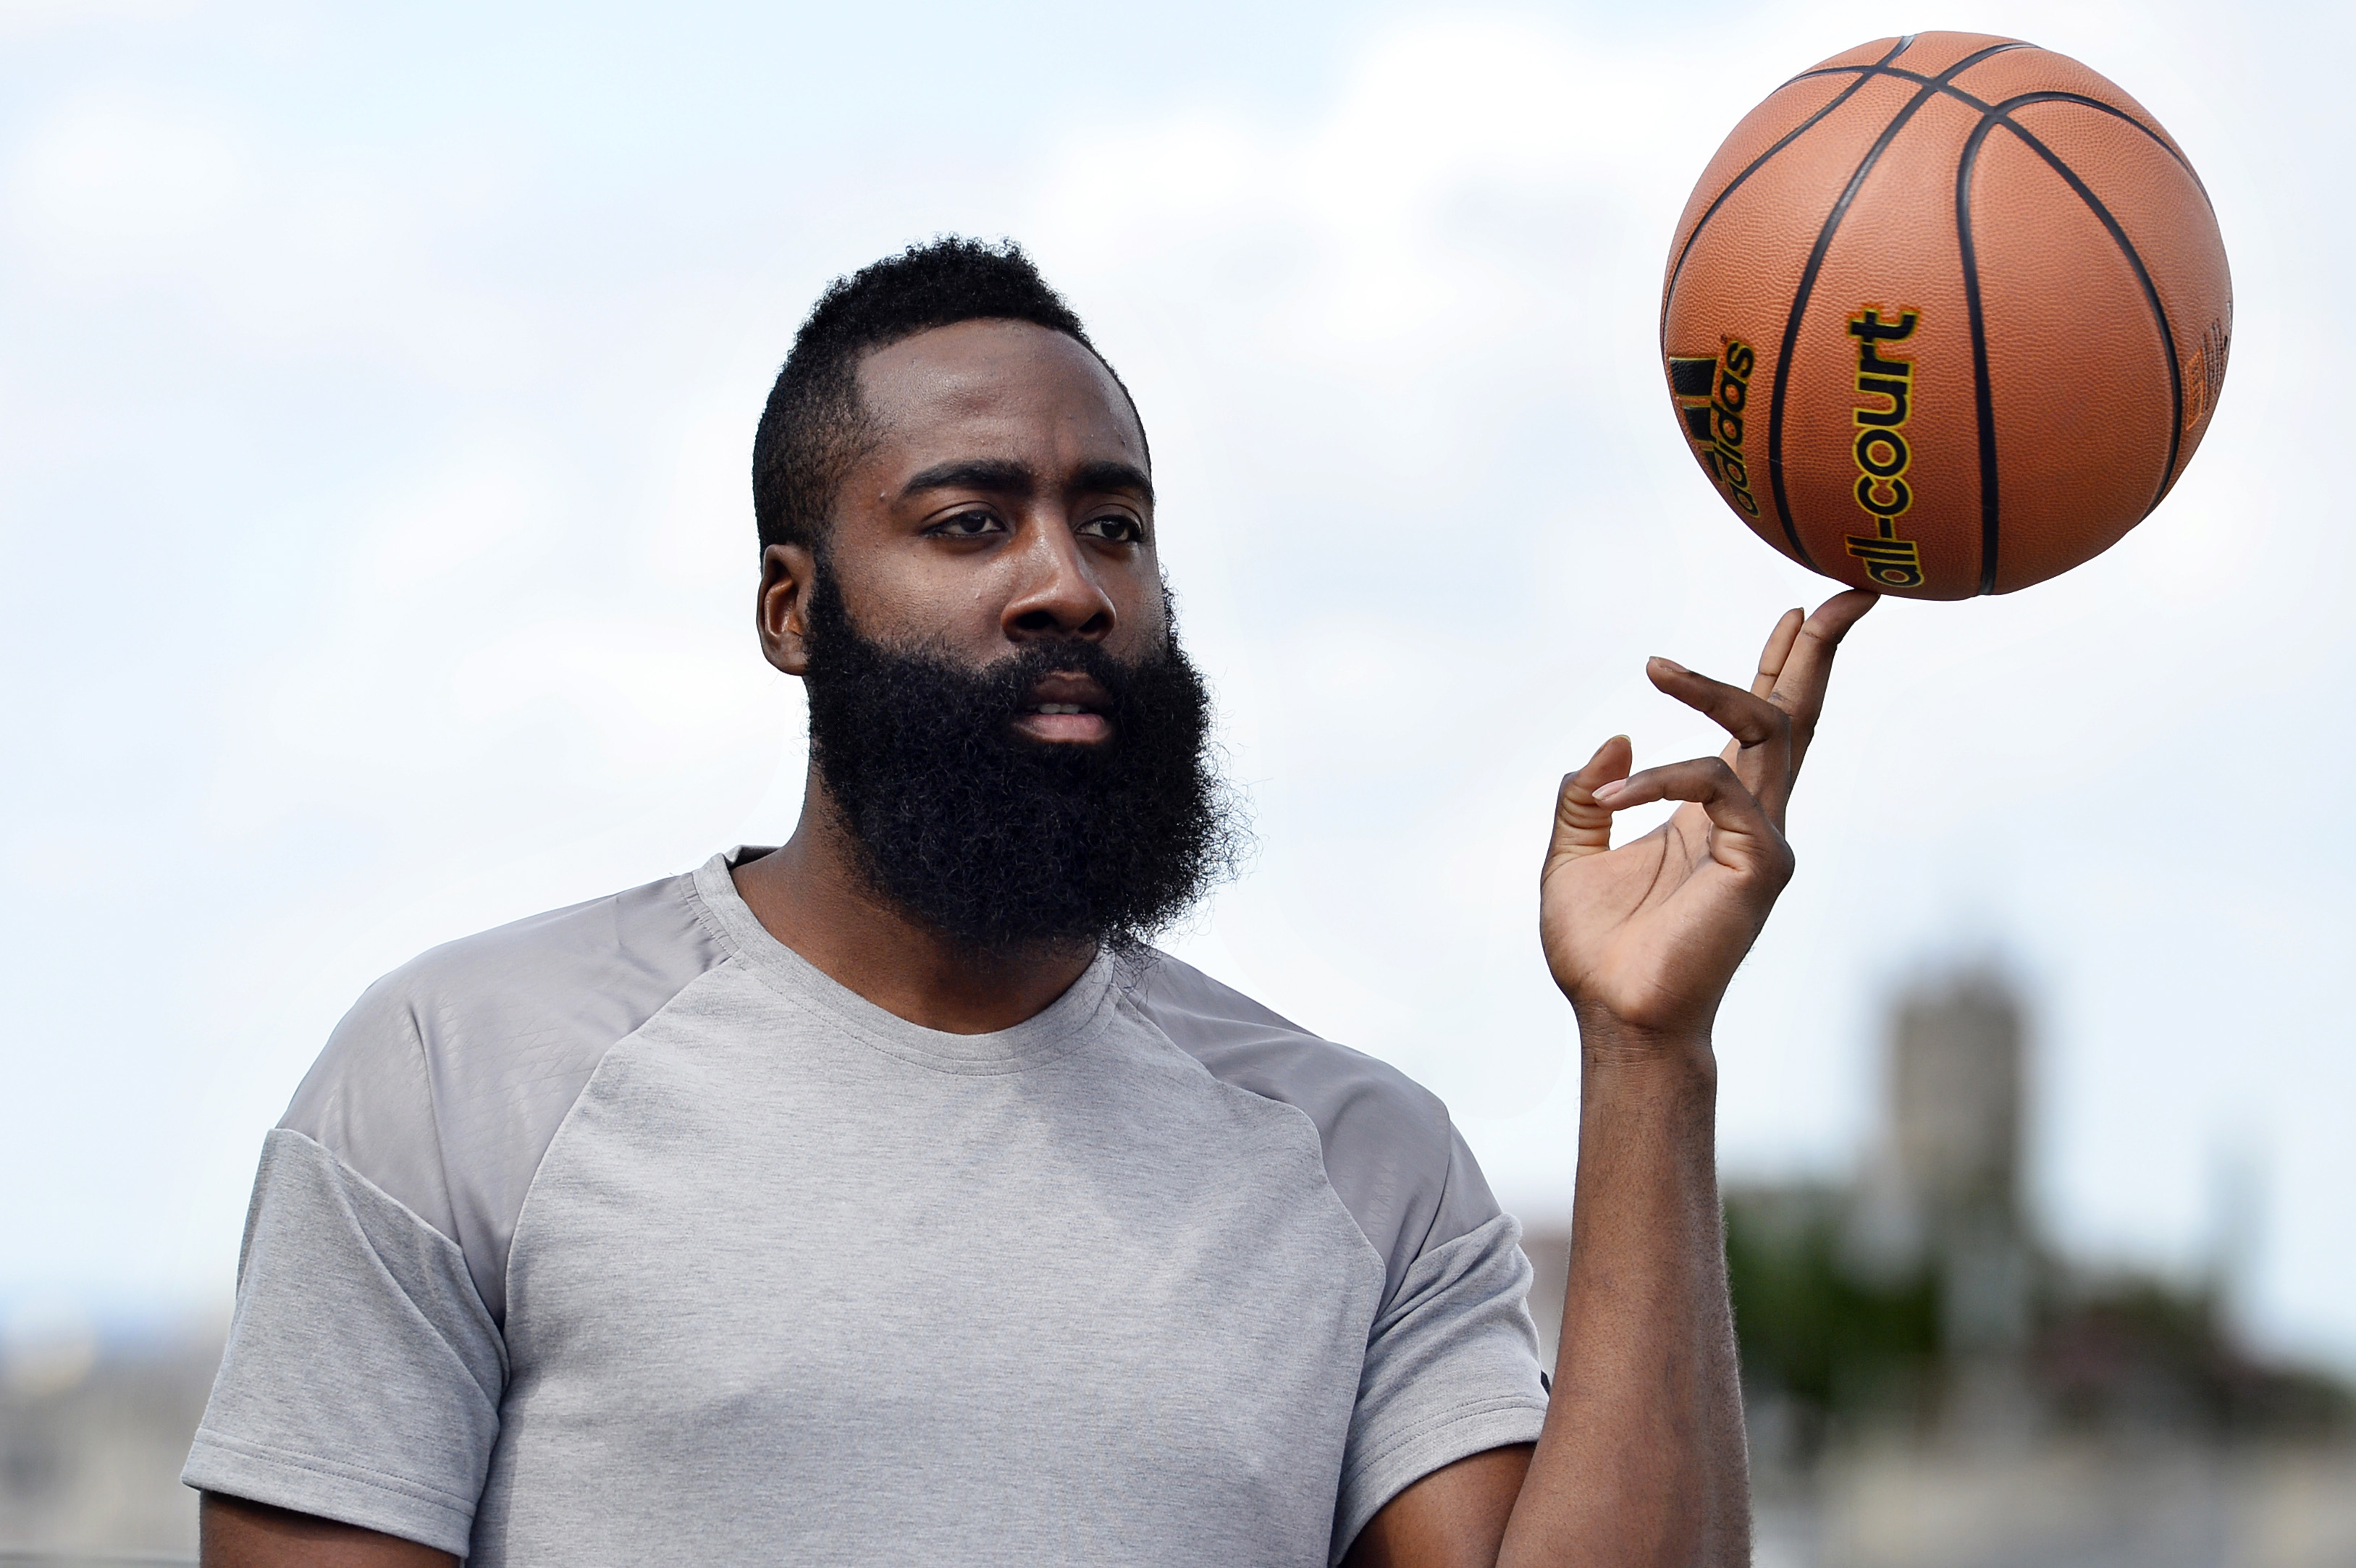 James Harden spins a ball on his finger for a photo shoot